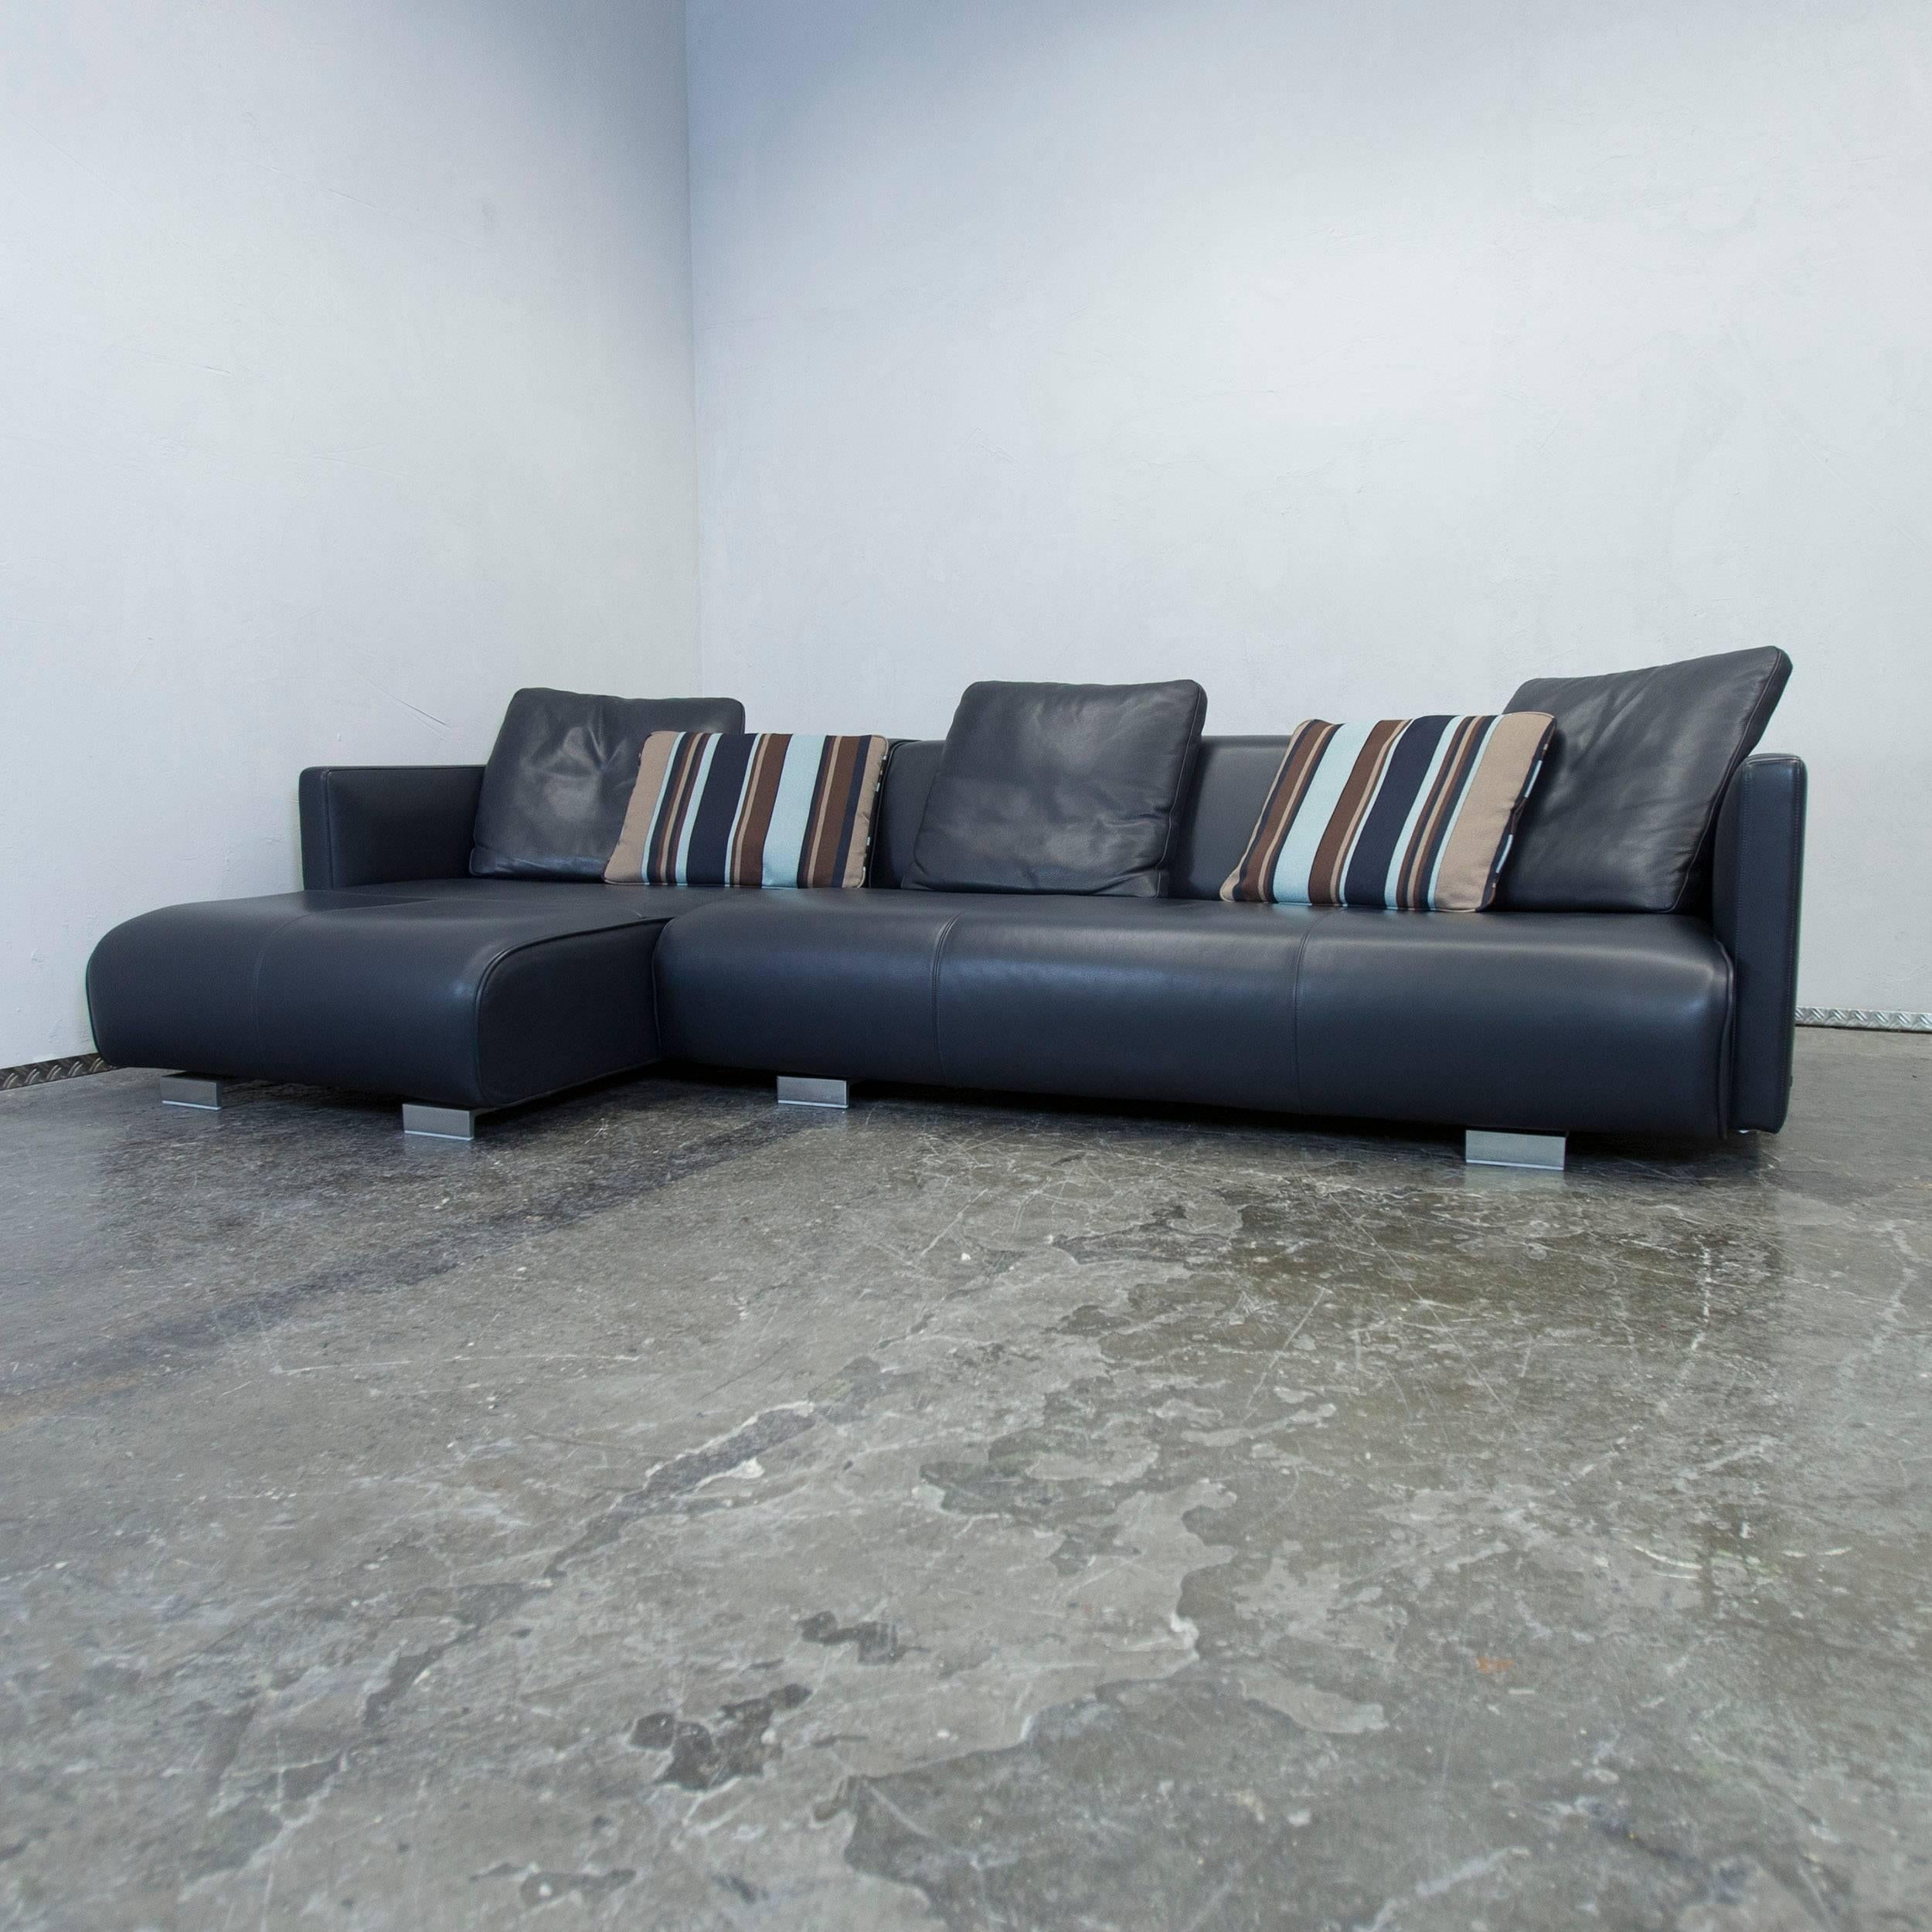 Rolf Benz premium corner sofa dark blue leather made in Germany in great condition including stool.